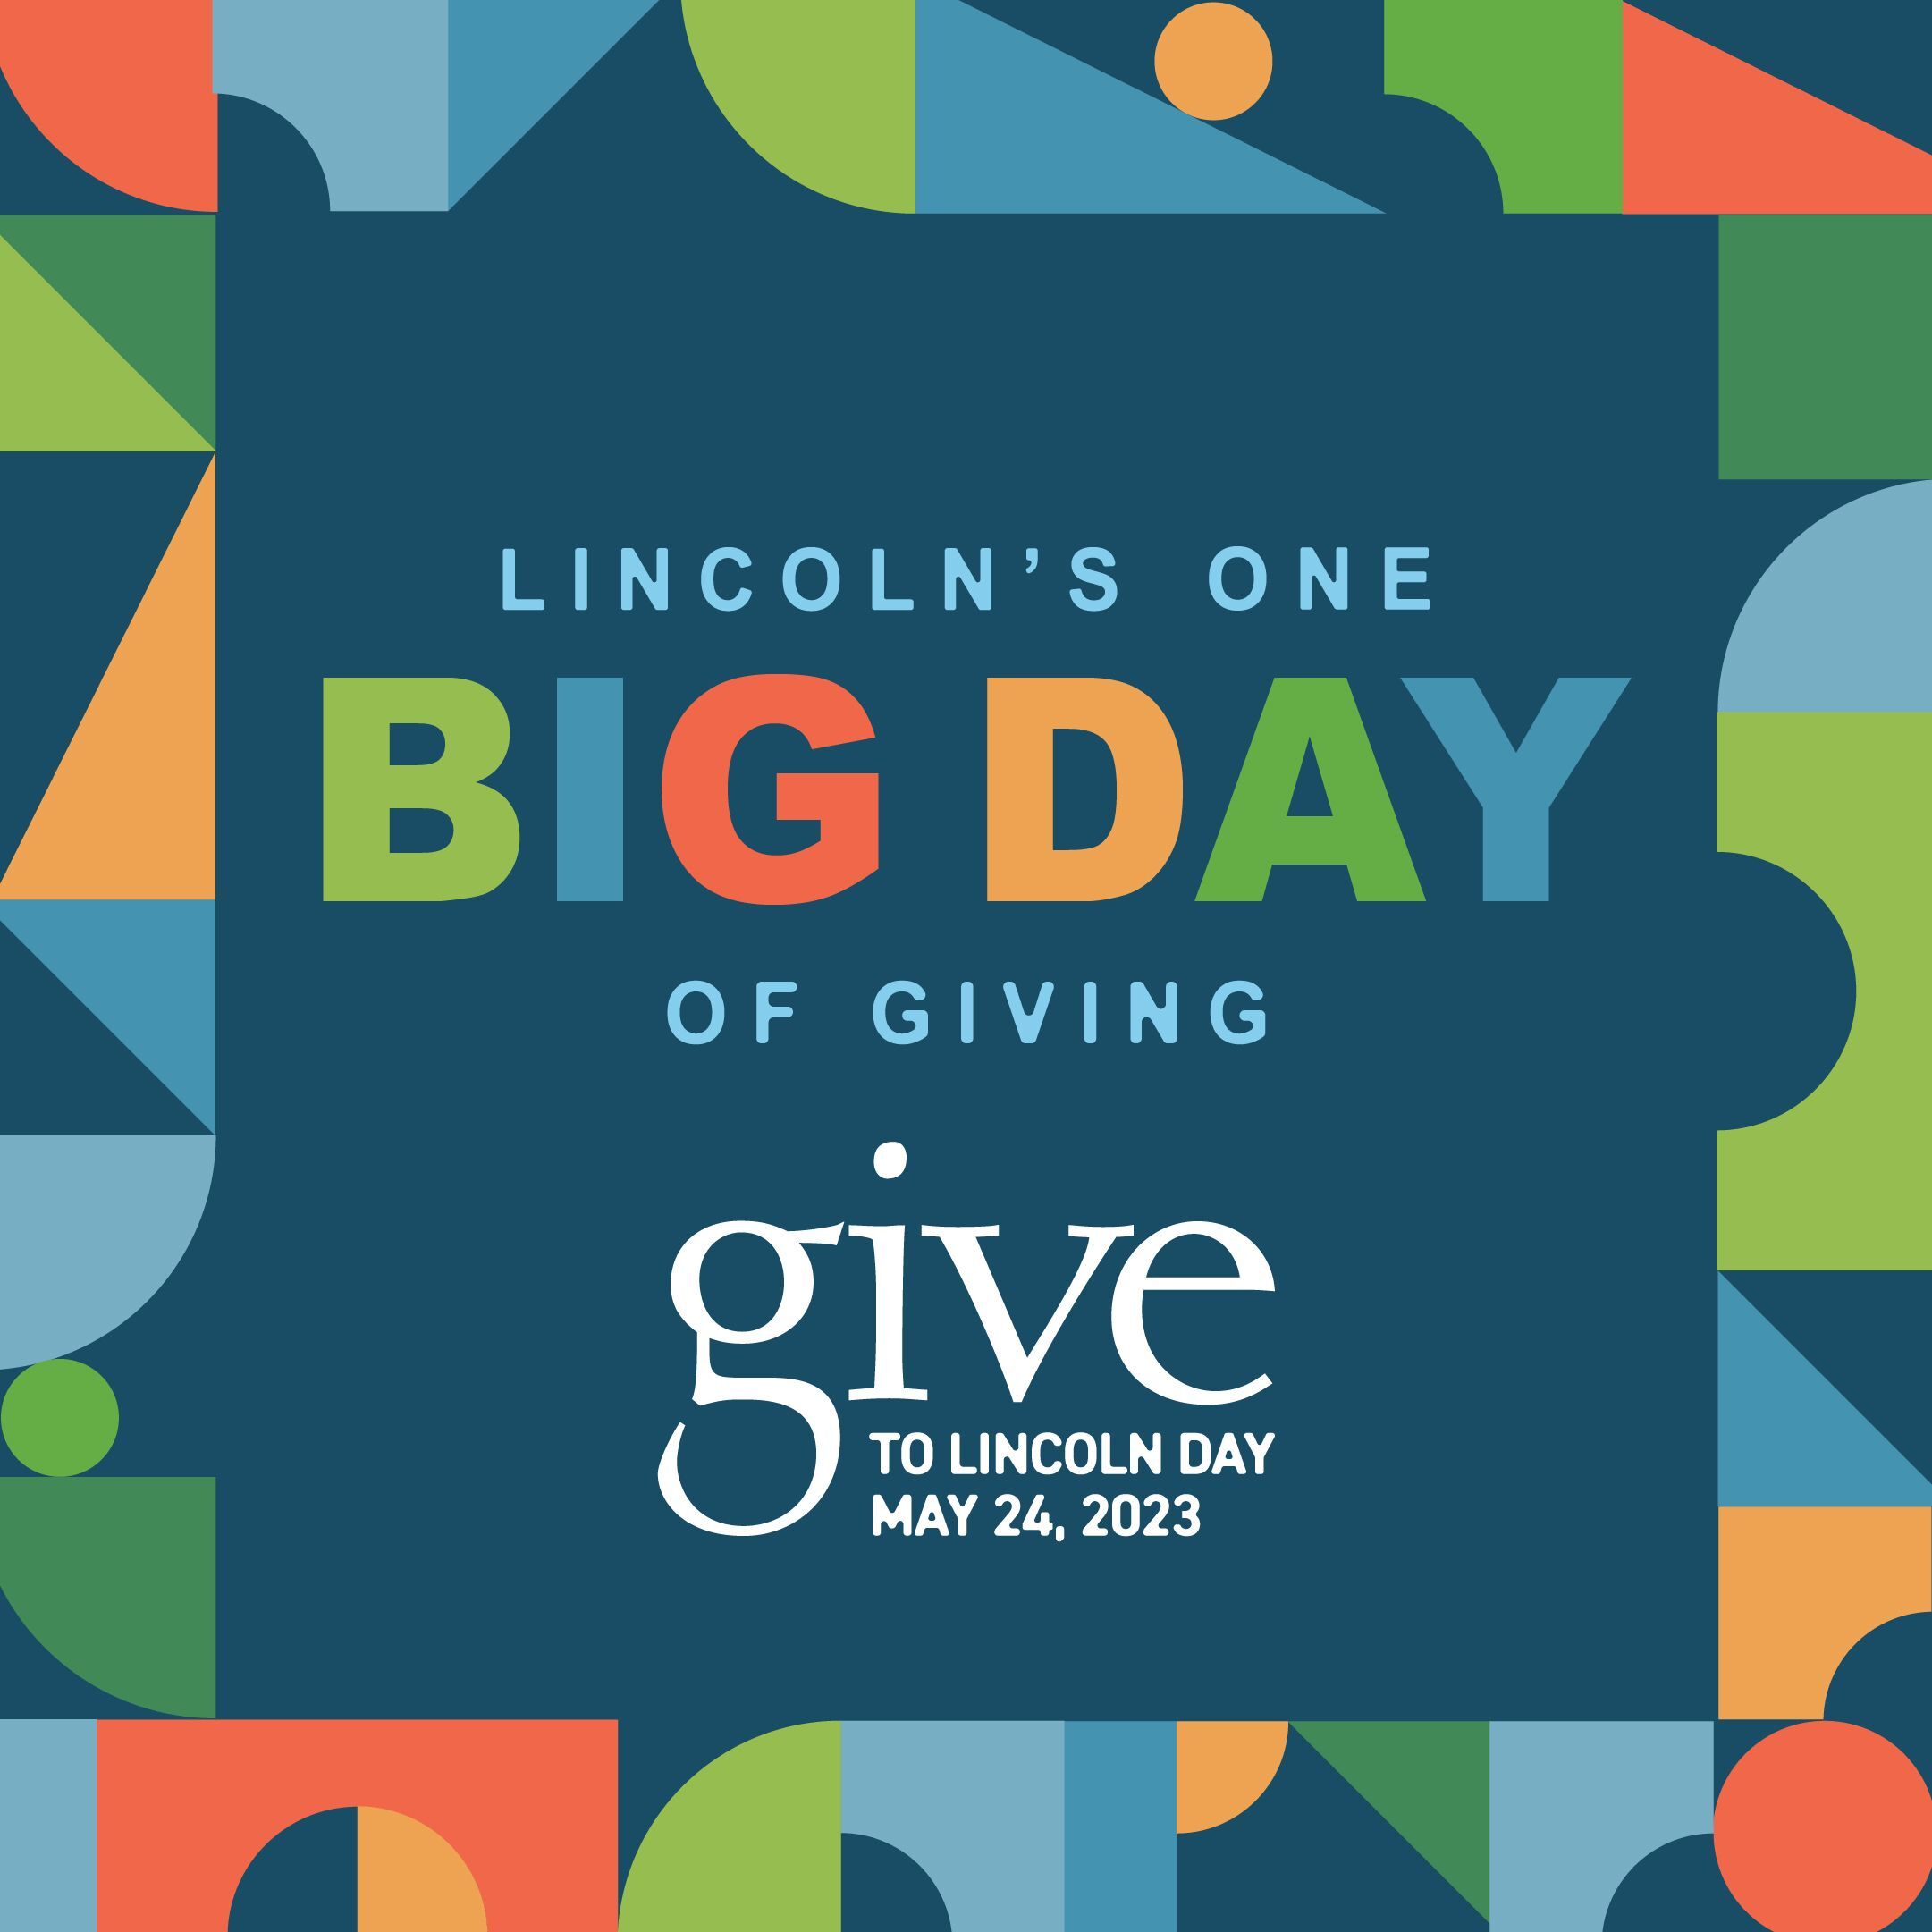 Give to Lincoln Day is May 24, 2023.